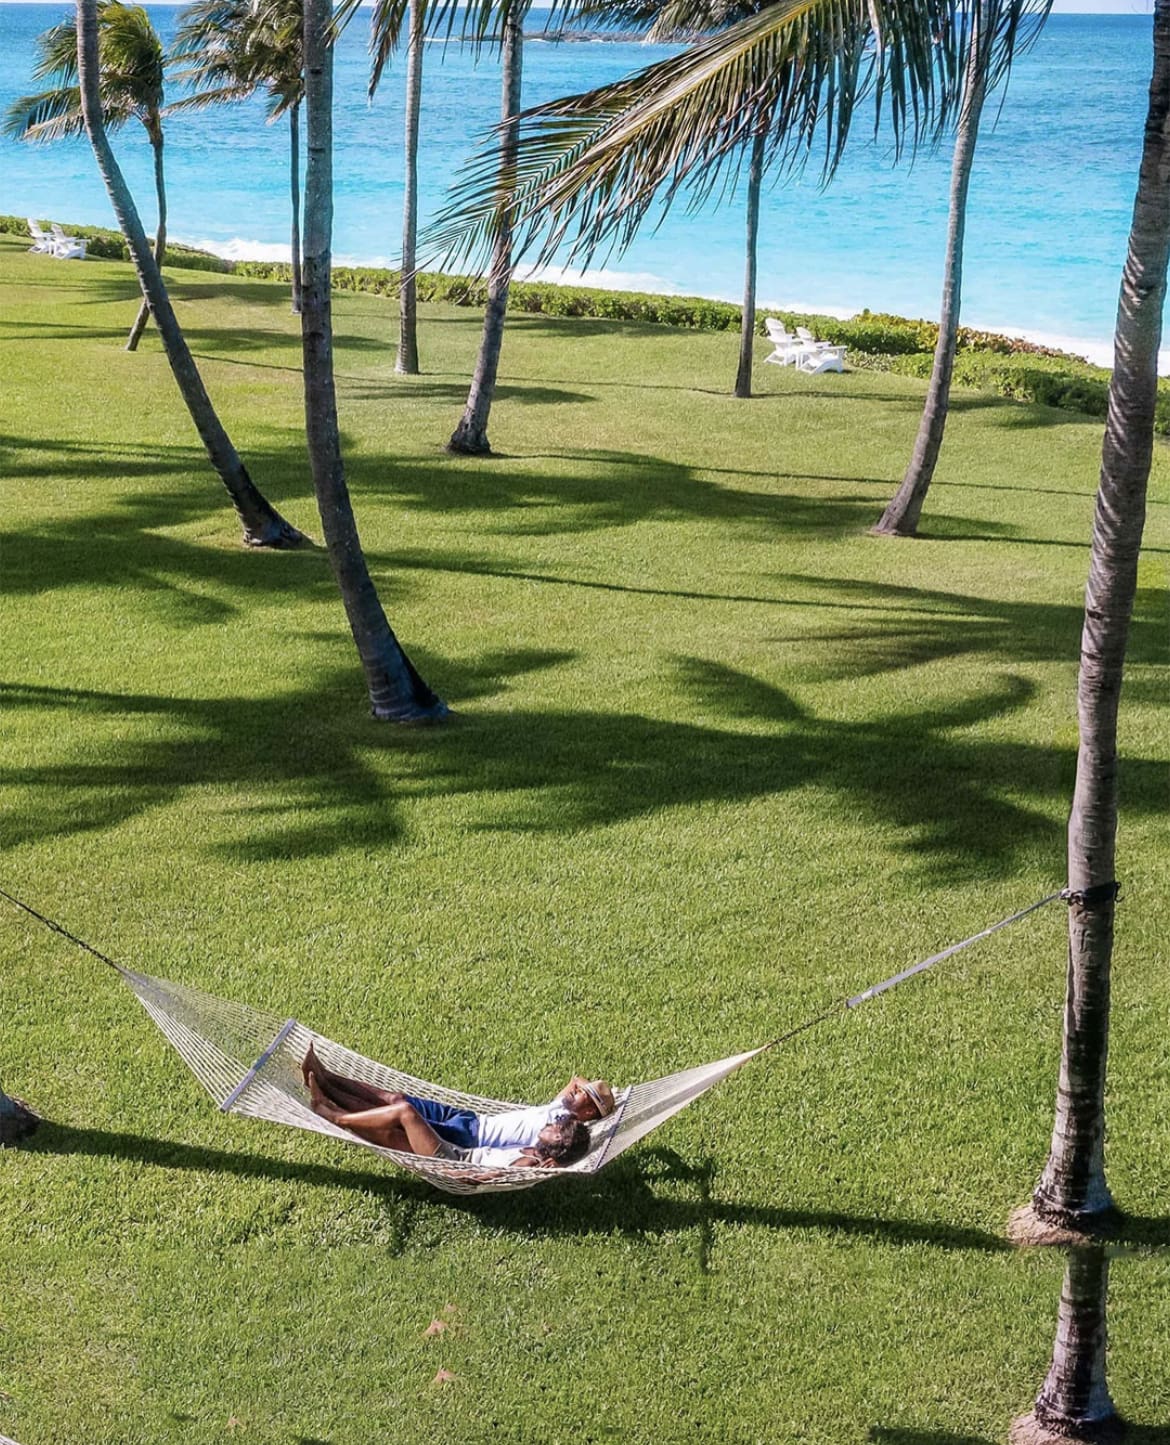 Chilling in a hammock, the Bahamas